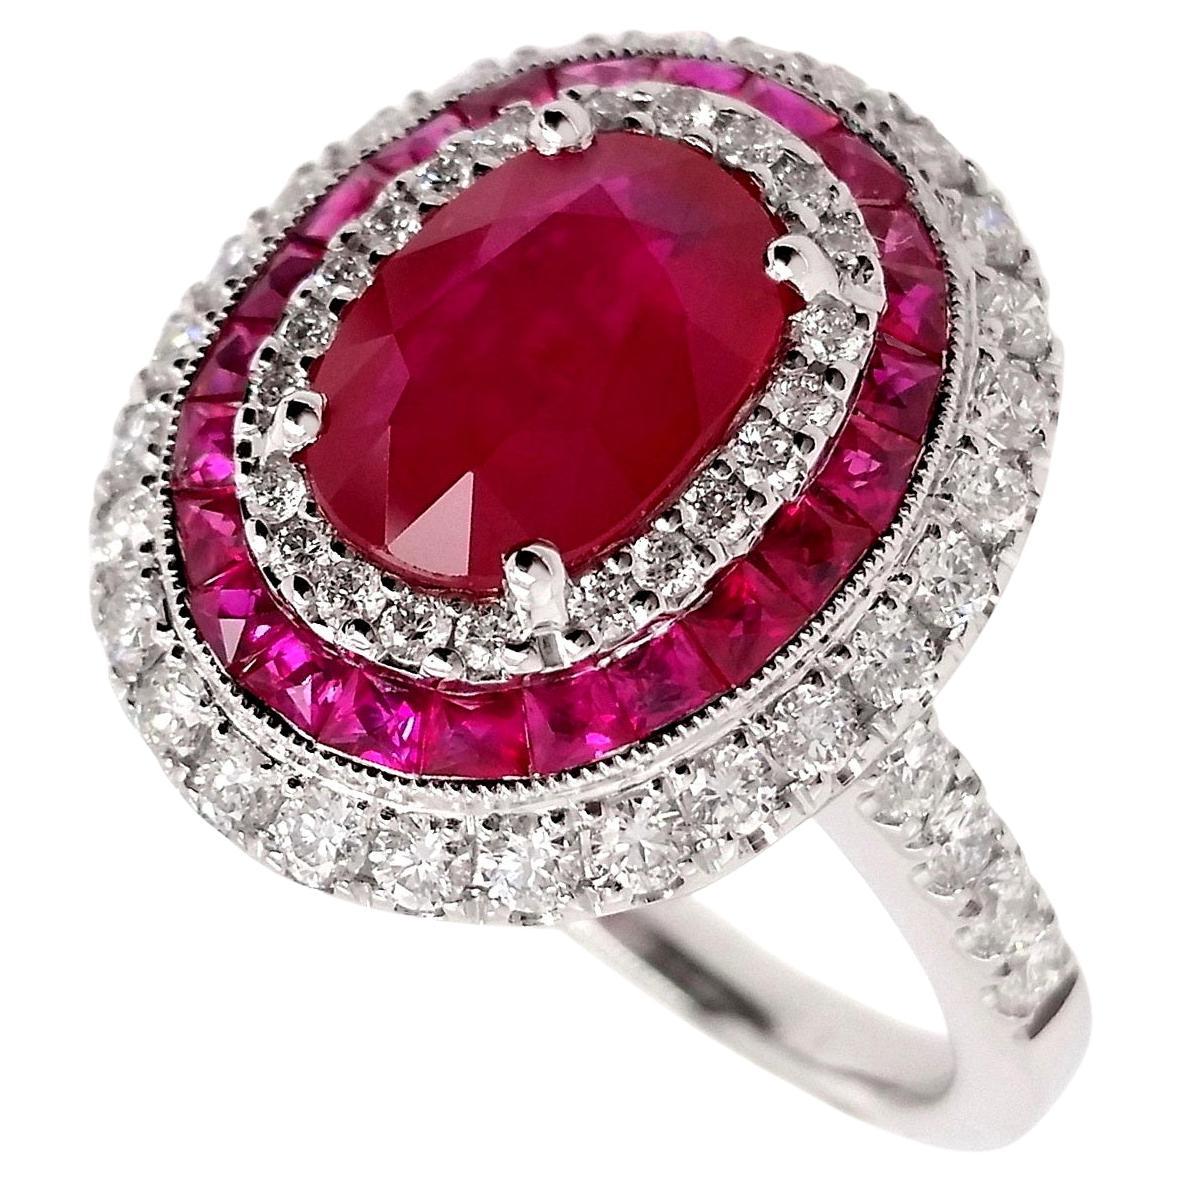 IGI Certified 319ct Natural Rubies and 0.74ct Diamonds 18k White Gold Ring For Sale